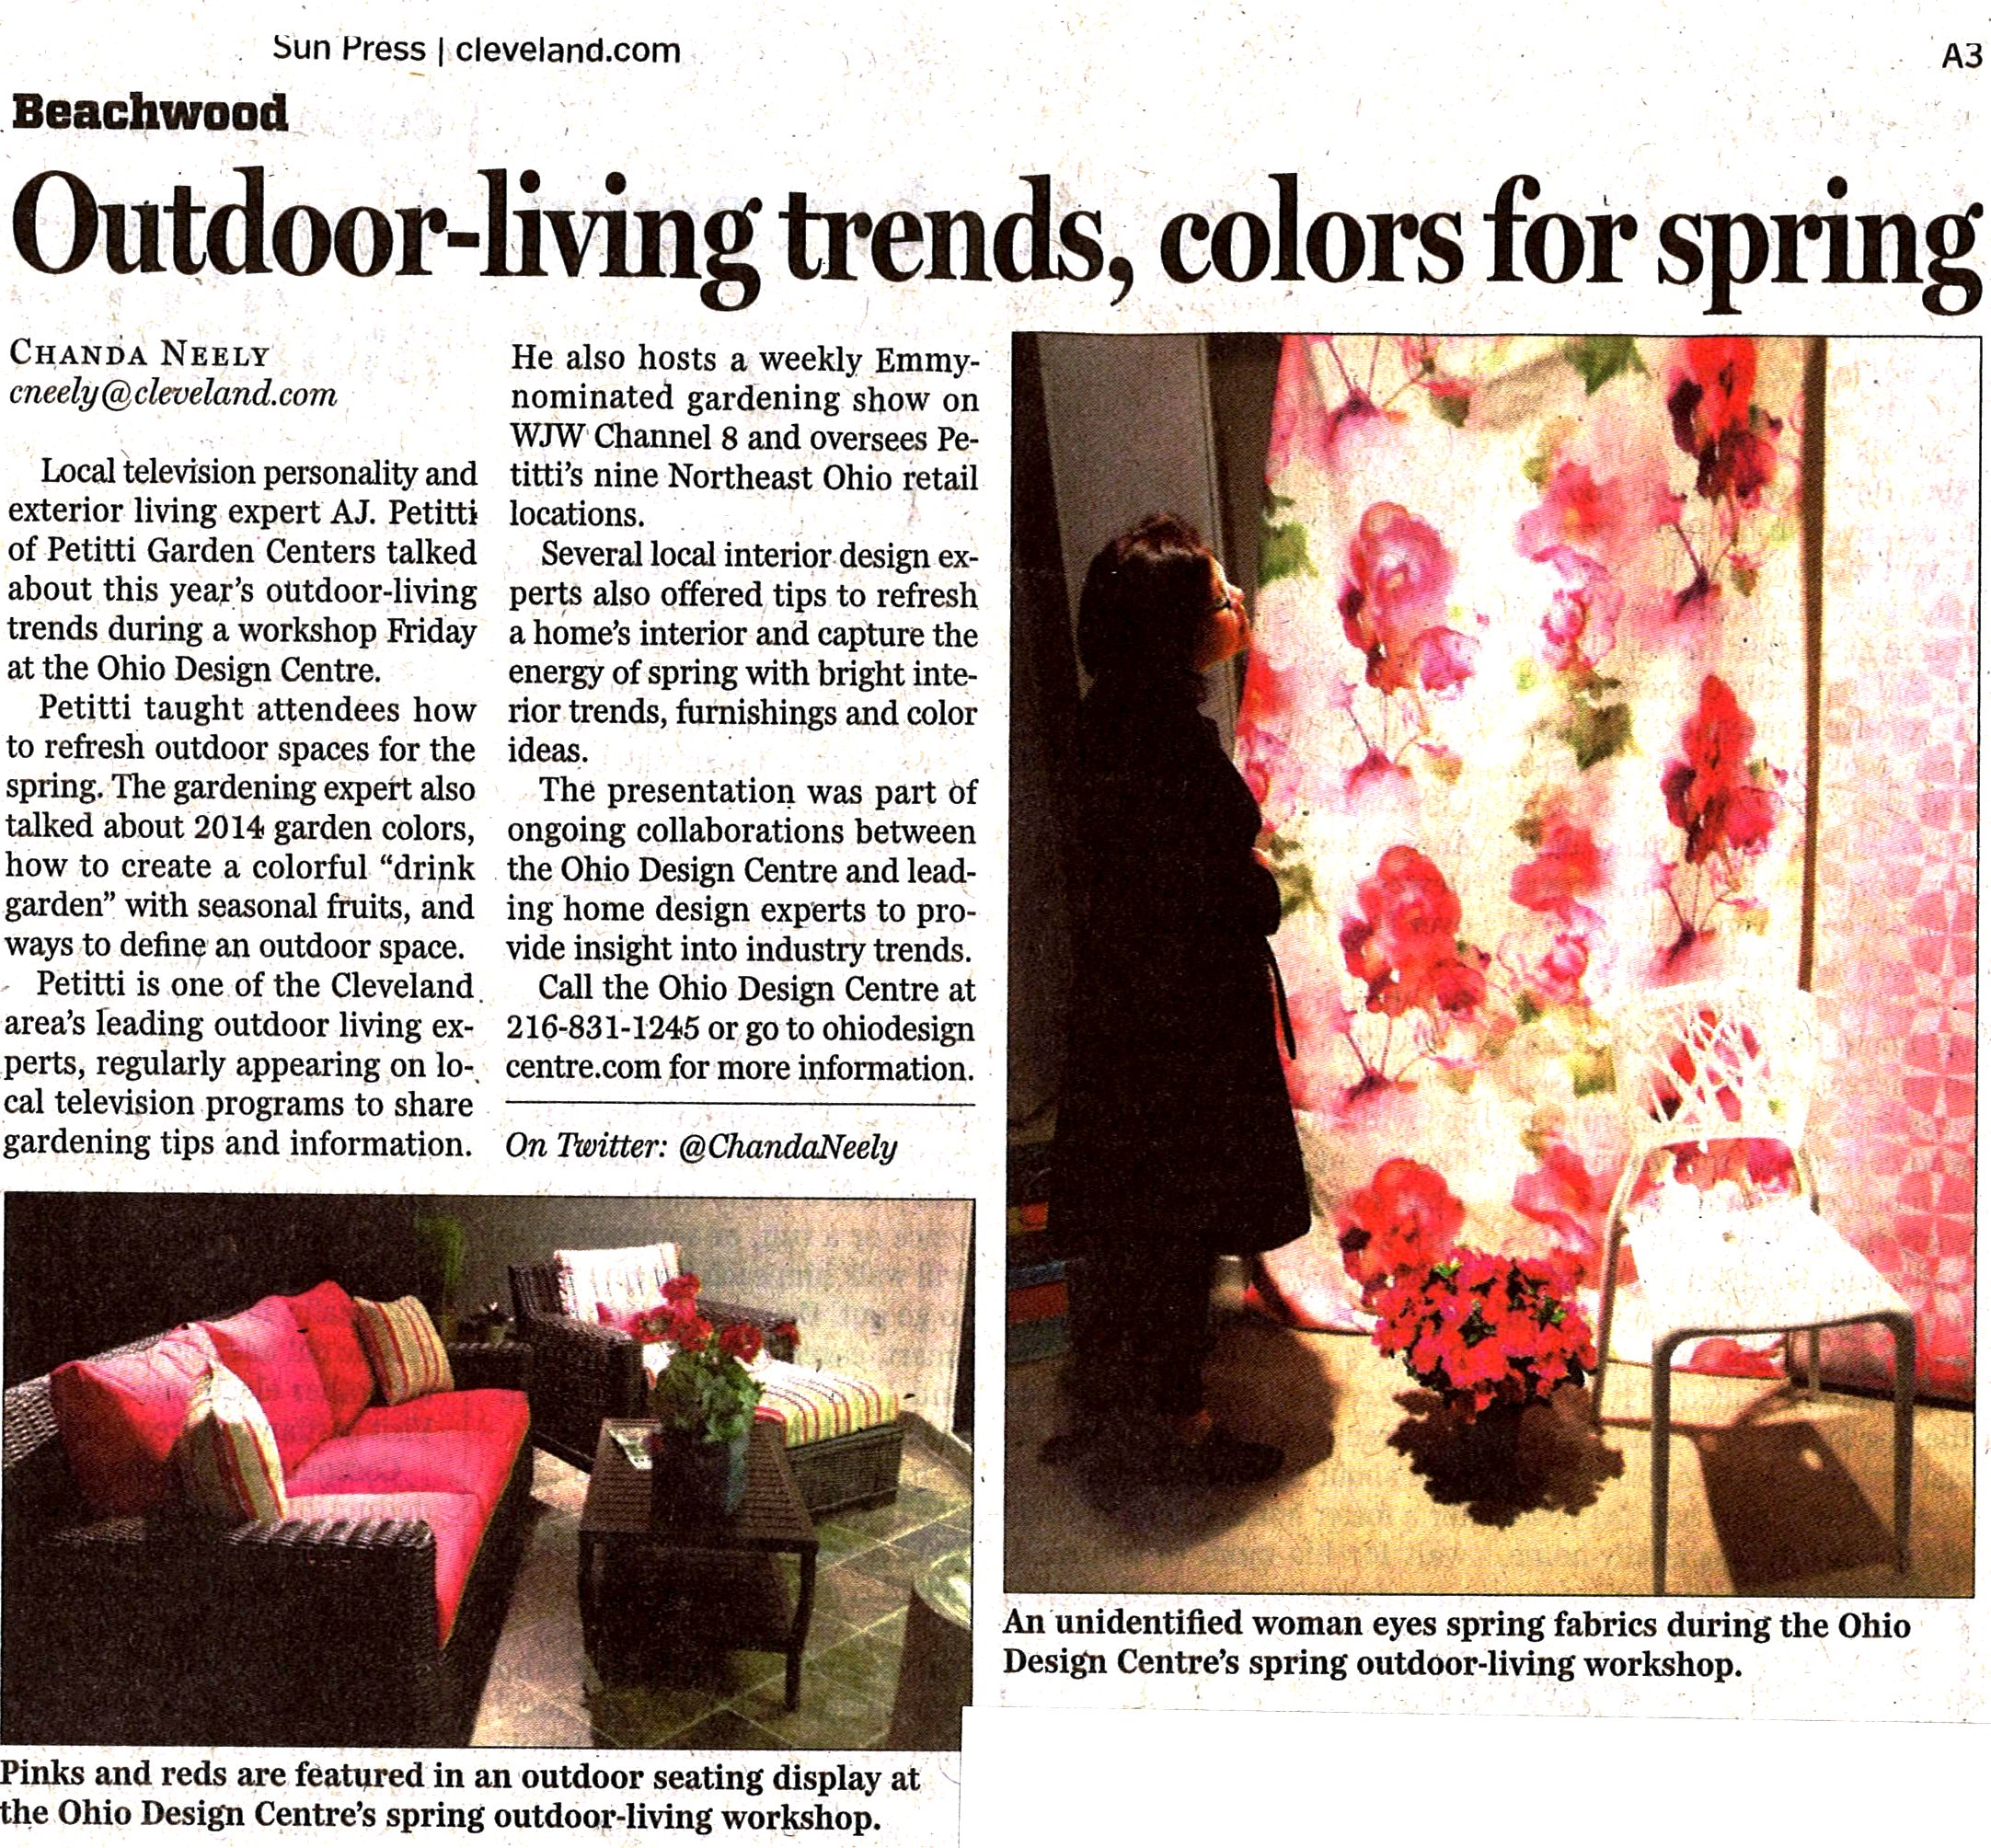 Outdoor-living trends, colors for spring